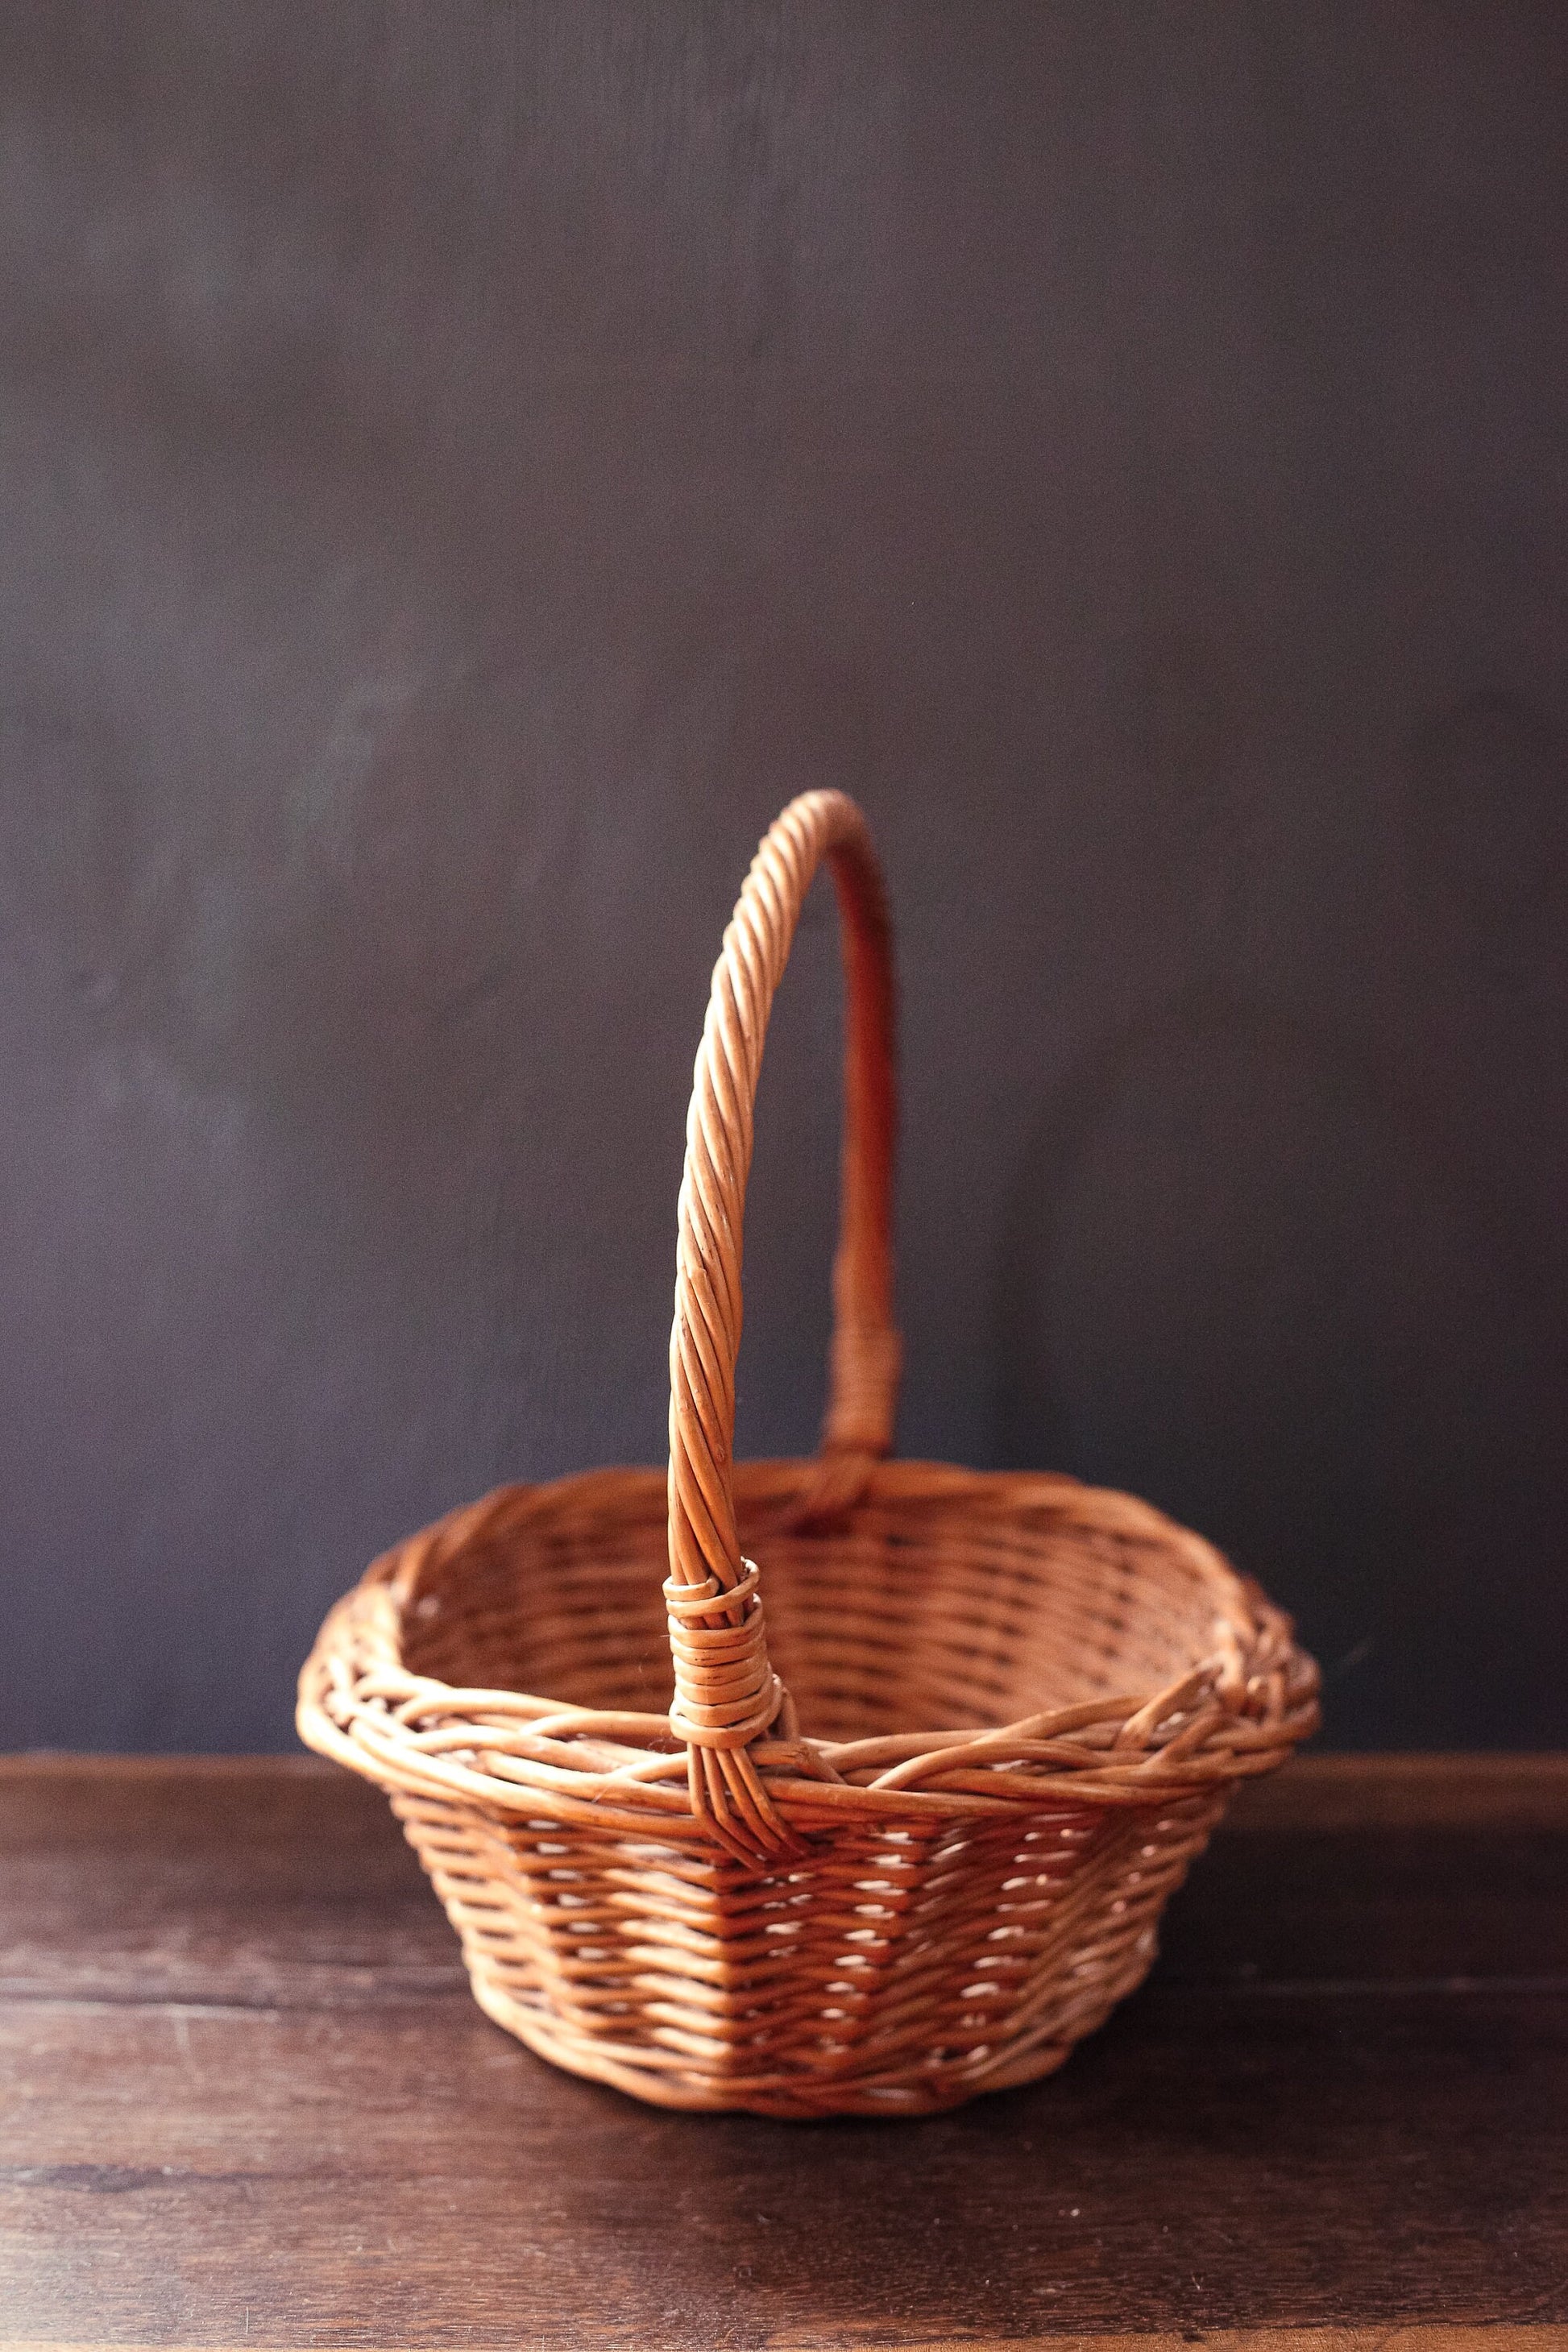 Oval Wicker Basket with Flat Bottom and High Handle - Vintage Wicker/Rattan Basket with Handle